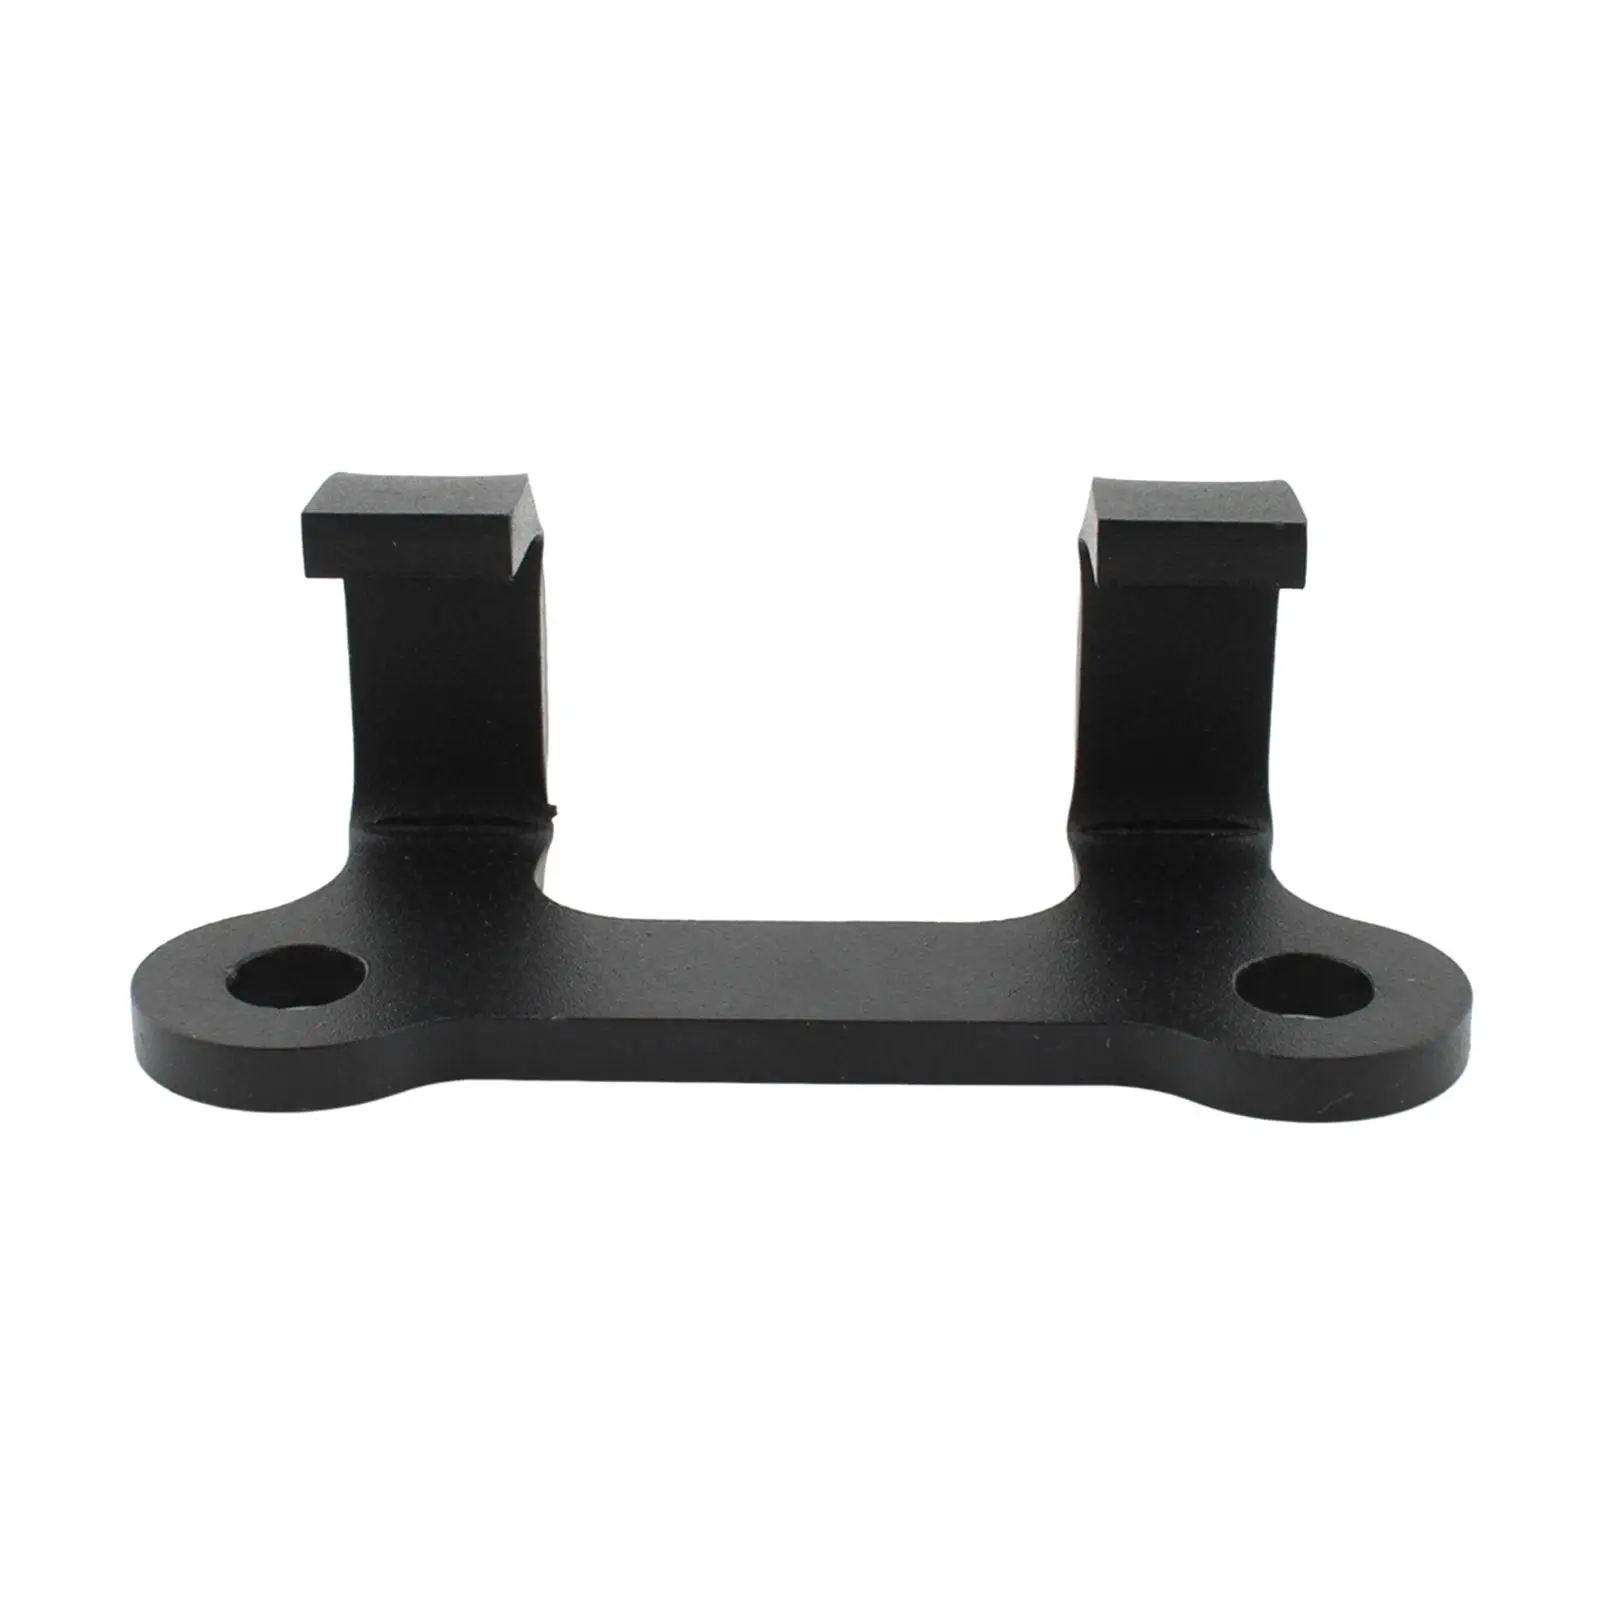 Motorbike Headlight Lamp Mount Bracket, Black Aluminum Alloy Mounting Support for GB350 CB350 High Quality Replacement.